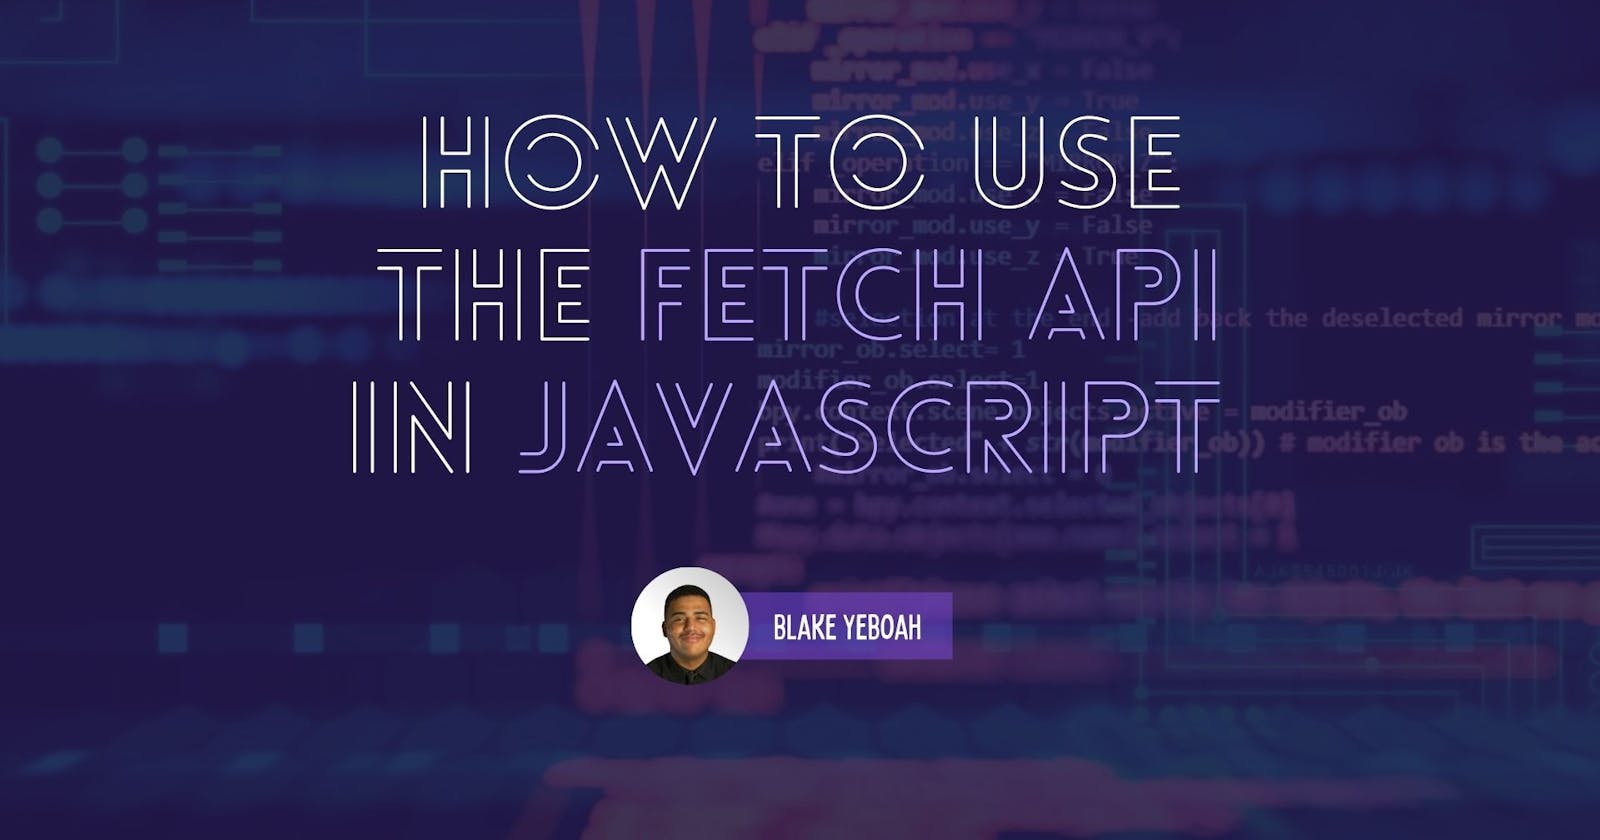 How to use the Fetch API in JavaScript